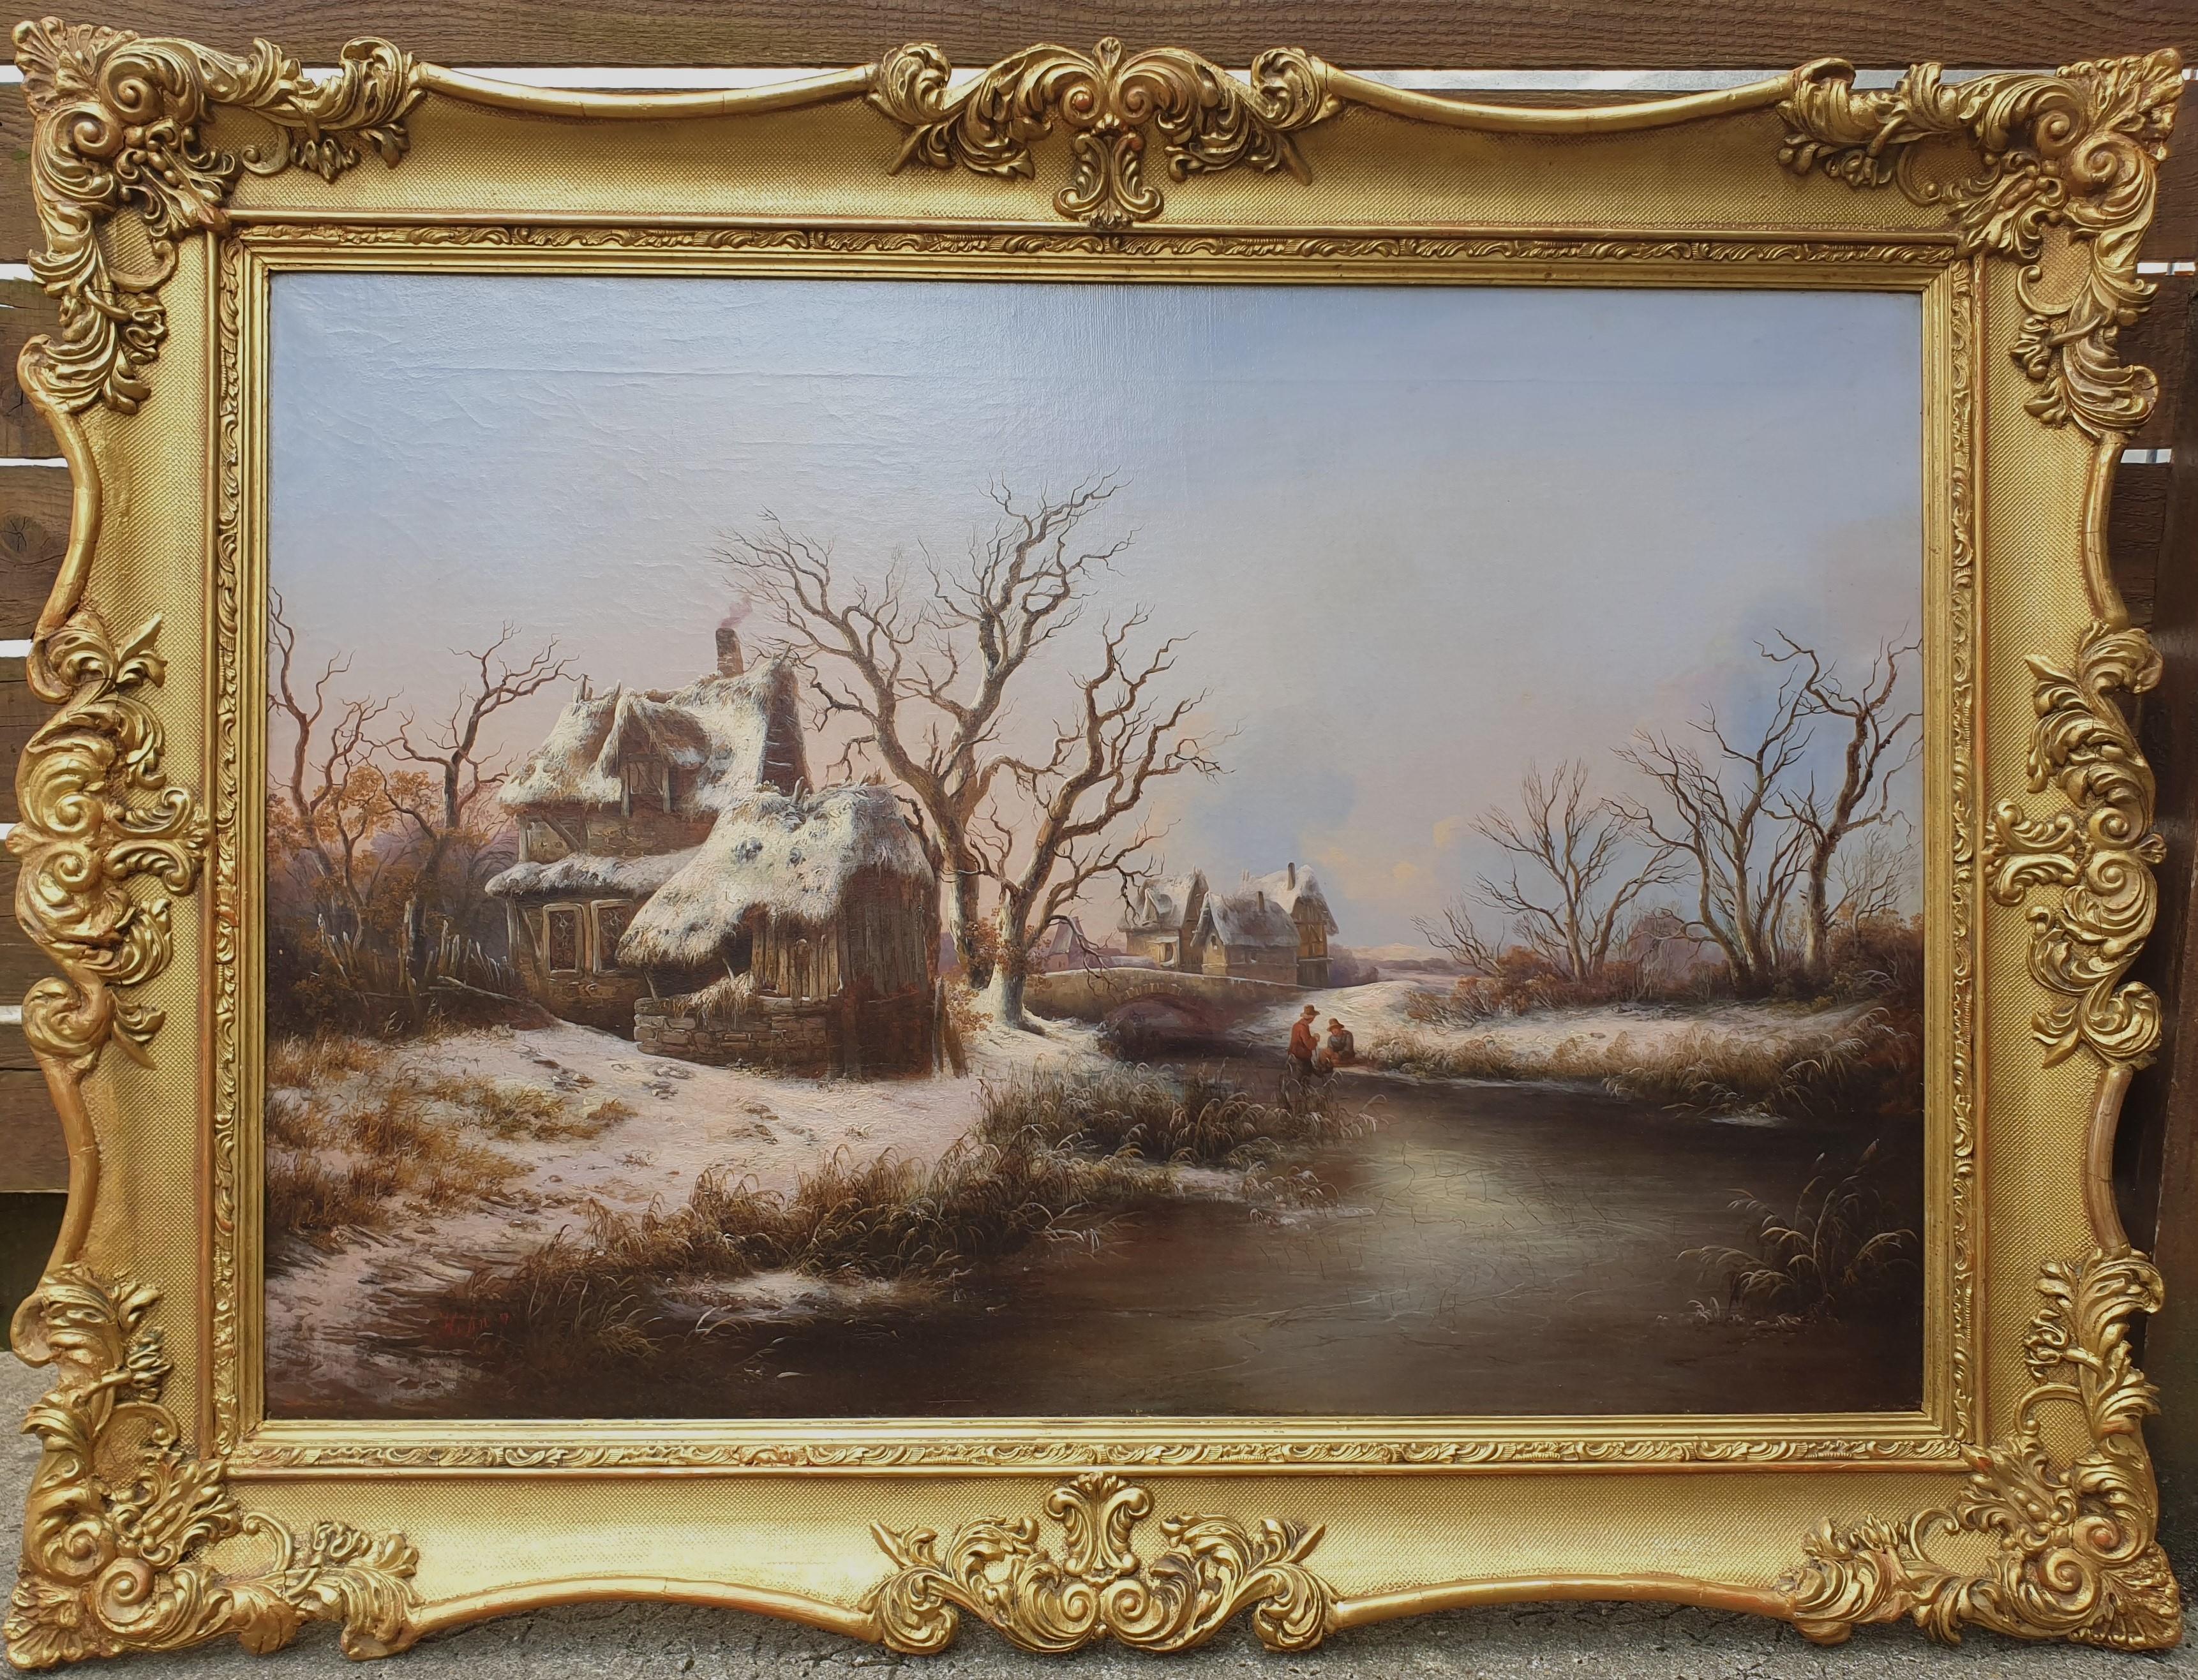 Georg HÖHN Neustrelitz, 1812 – Dessau, 1879
Oil on canvas 67 x 97 cm (89 x 120 cm with the frame)
Signed lower left “Hohn p.”
19th century gilded wood frame 

Georg Höhn is a 19th century German landscape painter, of the Romantic period. He attended